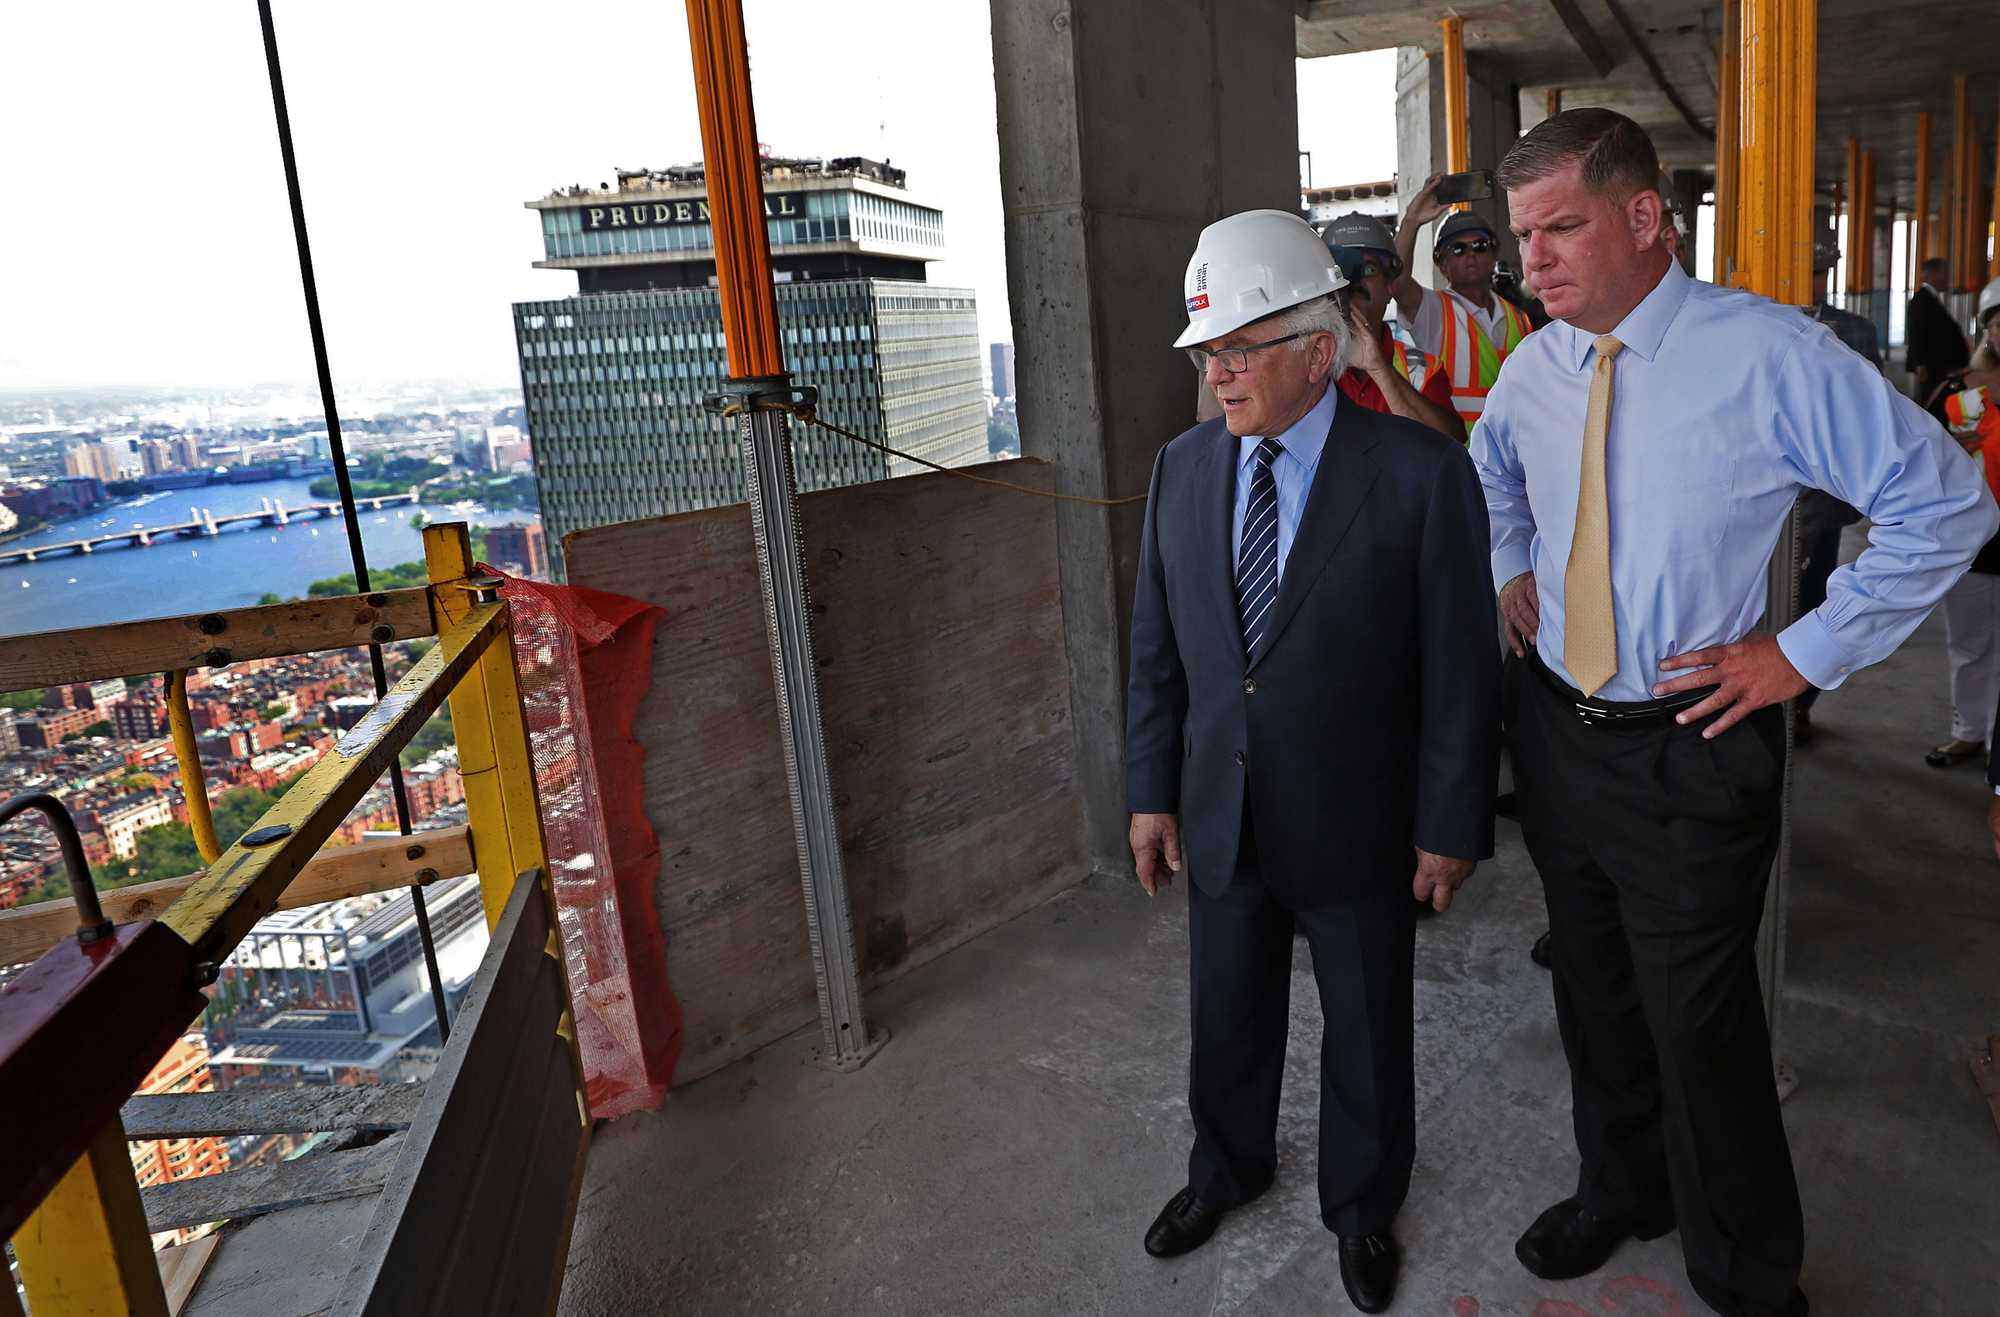 BOSTON, MA - 8/07/2018: On the 59th floor, Dick Friedman and Mayor Marty Walsh at the topping off ceremony for One Dalton, tallest building in Boston in 40 years.  (David L Ryan/Globe Staff ) SECTION: BUSINESS TOPIC 08onedalton